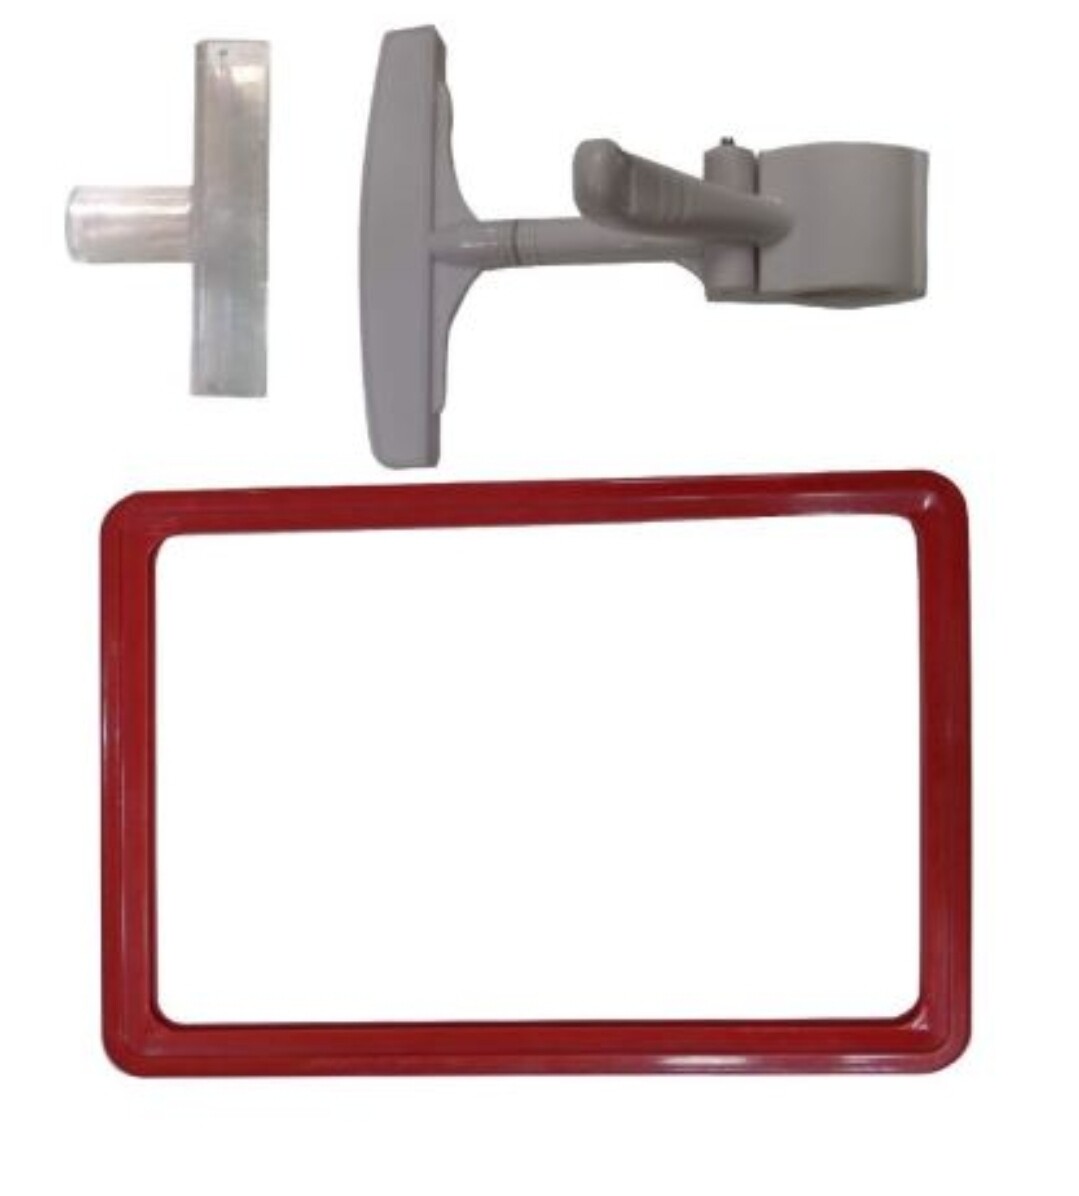 Price holder rectangle A5 210x148mm